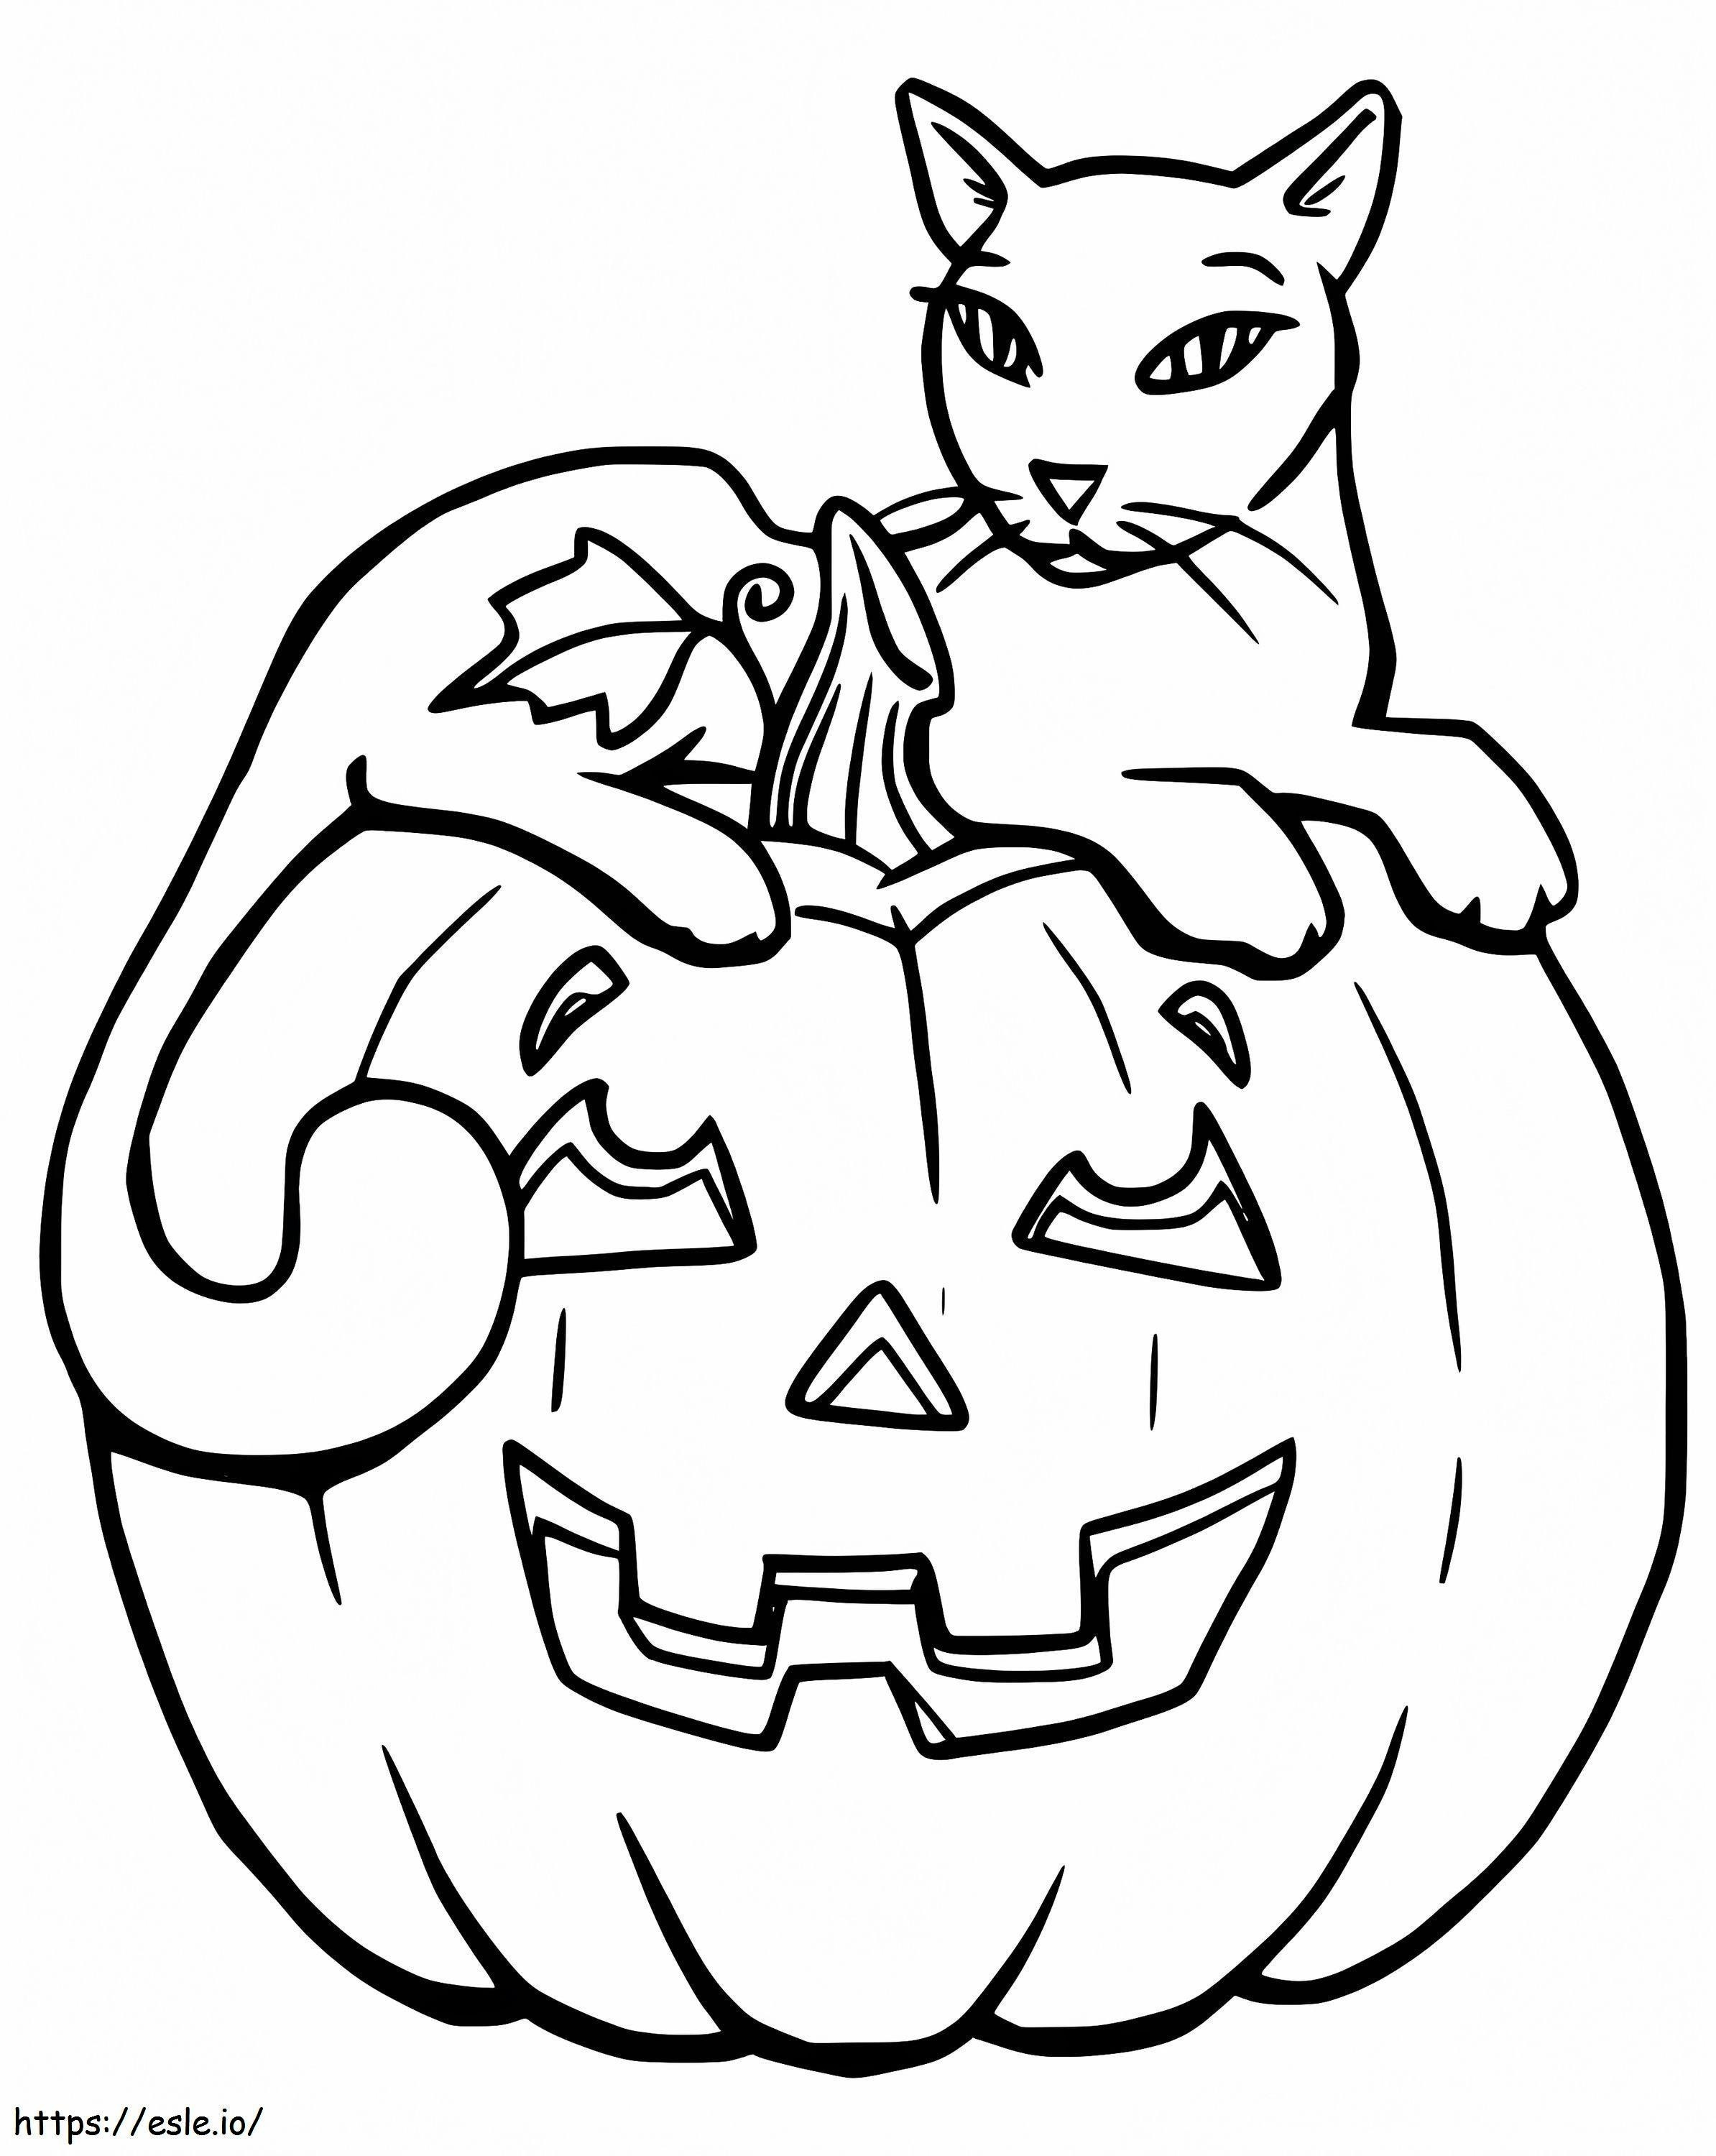 Halween Cat 4 coloring page